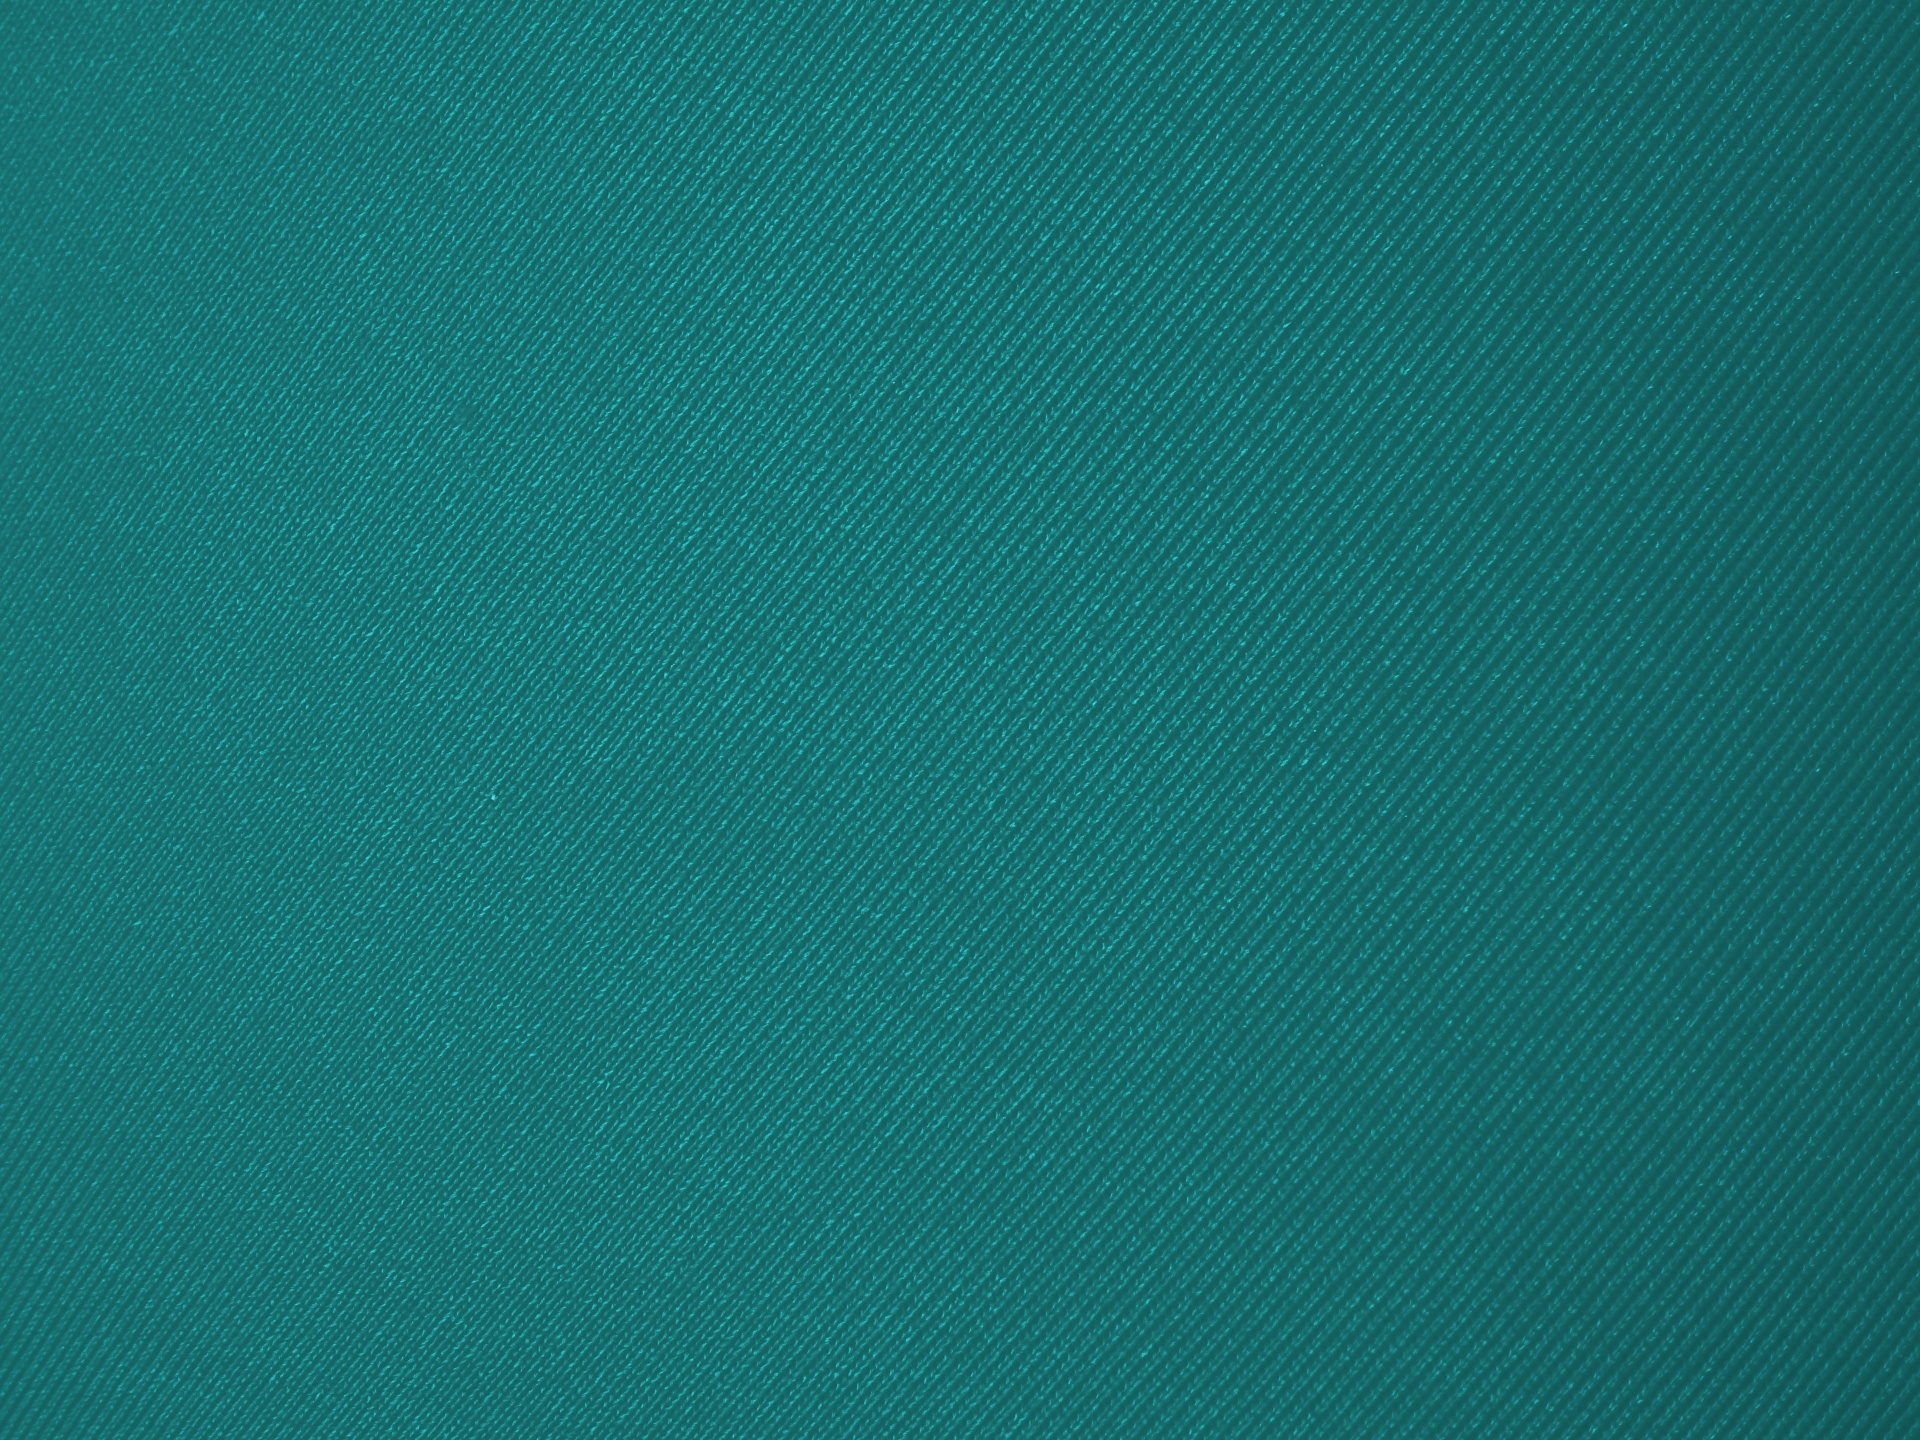 Turquoise Material Background